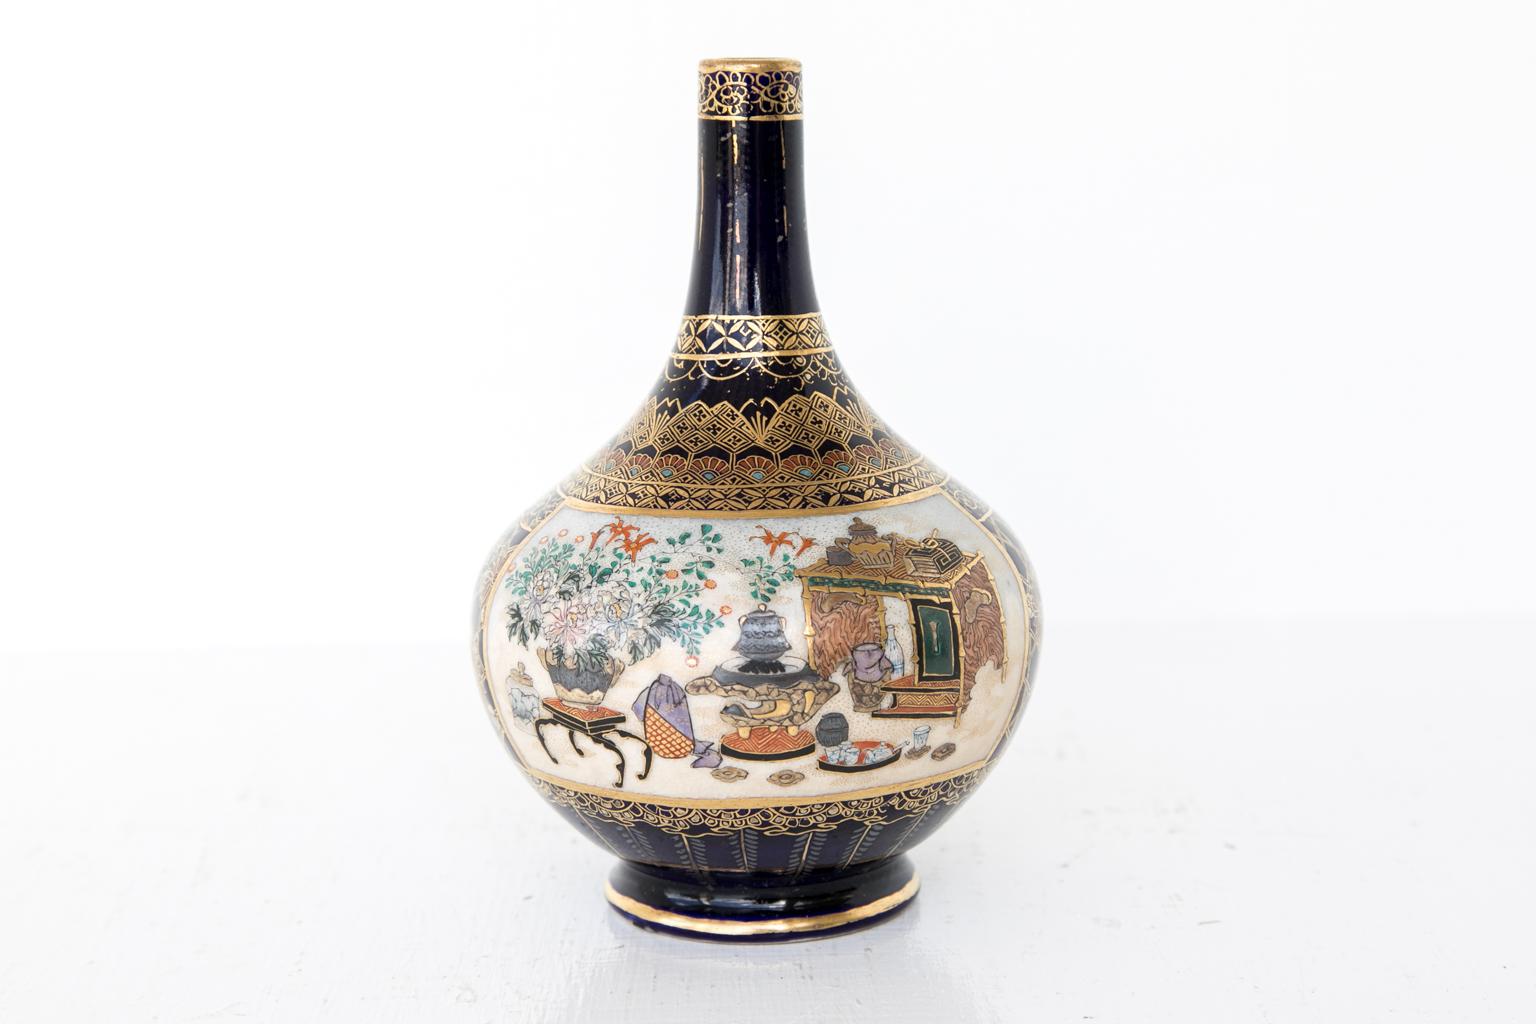 Small Japanese Satsuma vase, the panel on one side depicts various objects such as floral filled jardinieres, temple vases, urns, tea sets, and a bed. The other panel has multiple court figures in various poses. The borders above the panels have